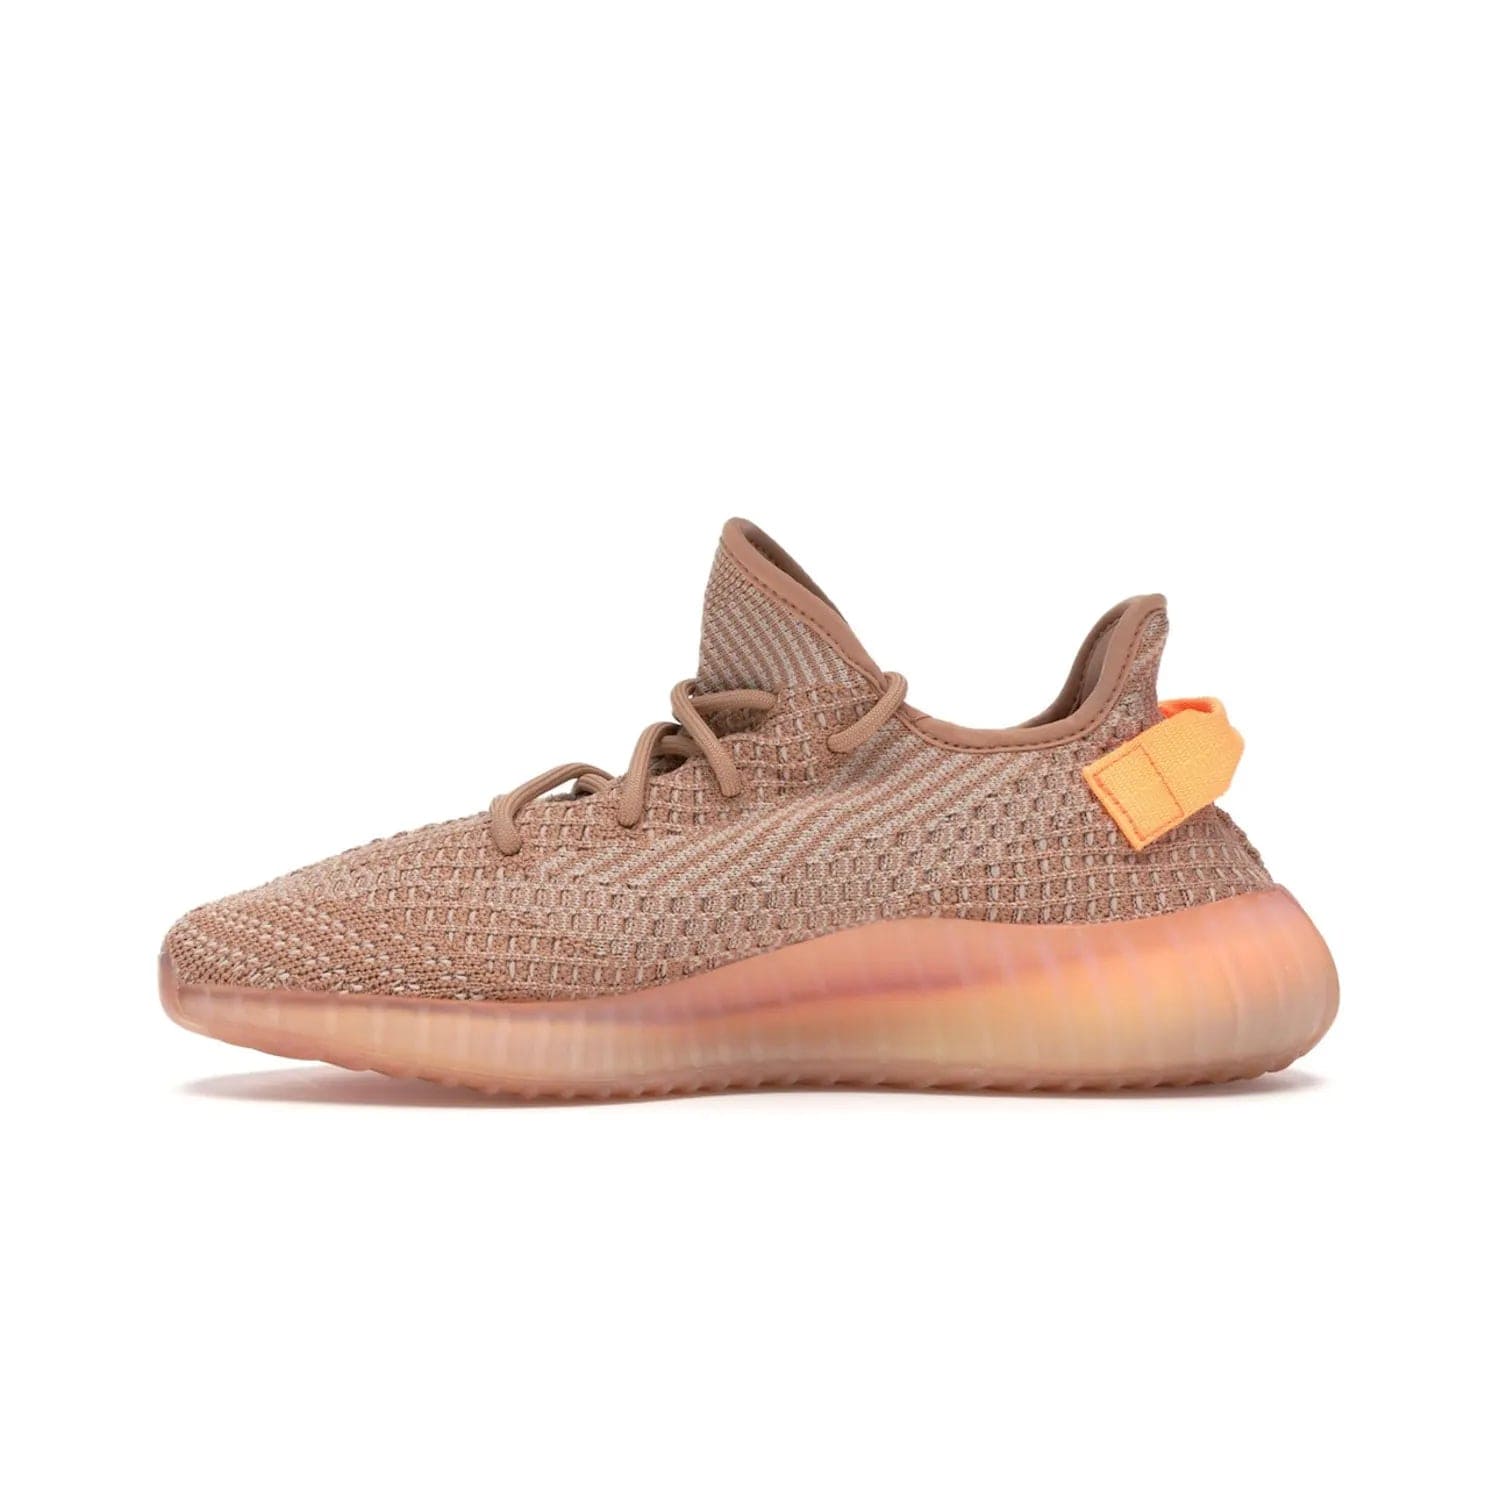 adidas Yeezy Boost 350 V2 Clay - Image 19 - Only at www.BallersClubKickz.com - The adidas Yeezy Boost 350 V2 Clay - style and swag in one shoe. Orange accents, clay midsole and sole. Get yours today!